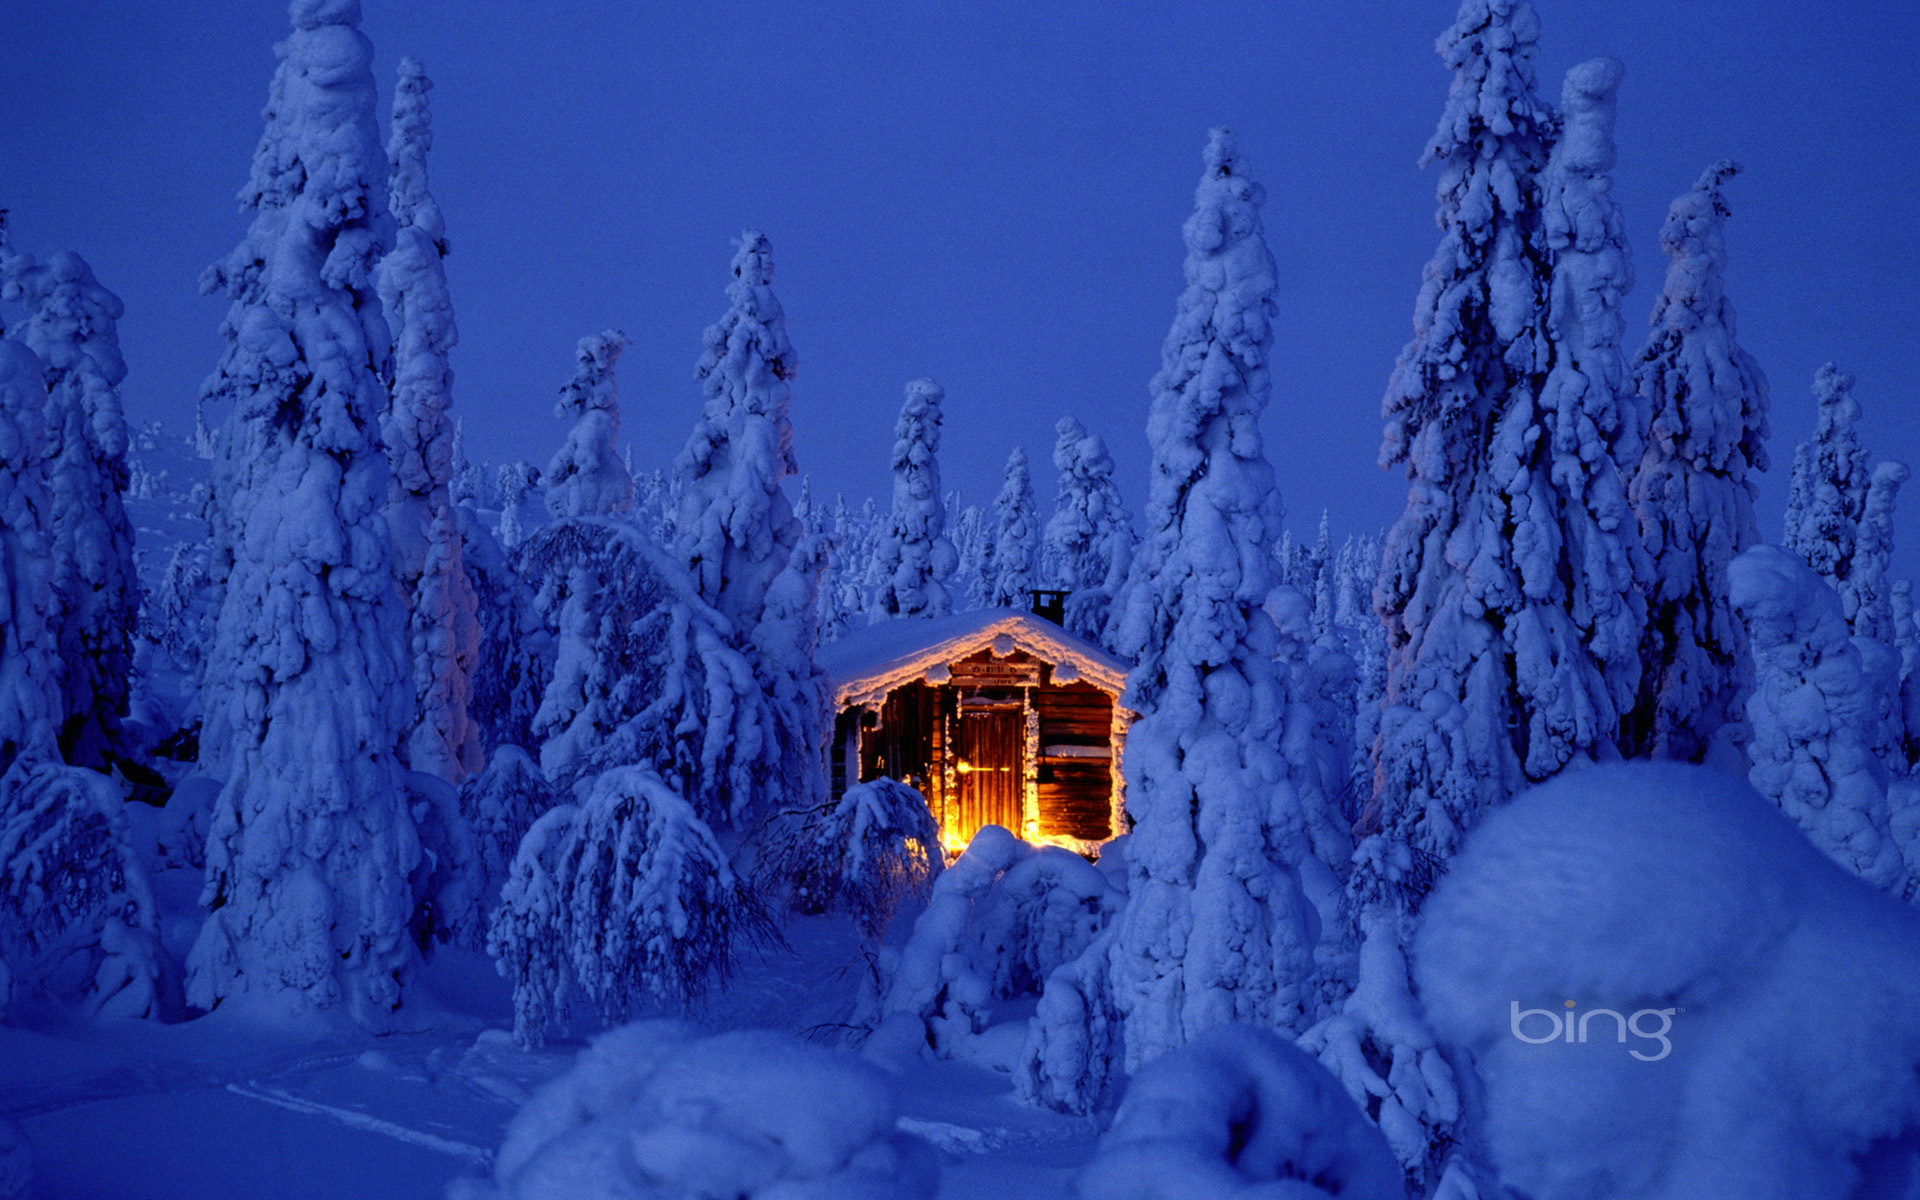 Snowy Spruce Forest With Log Cabin In Riisitunturi National Park